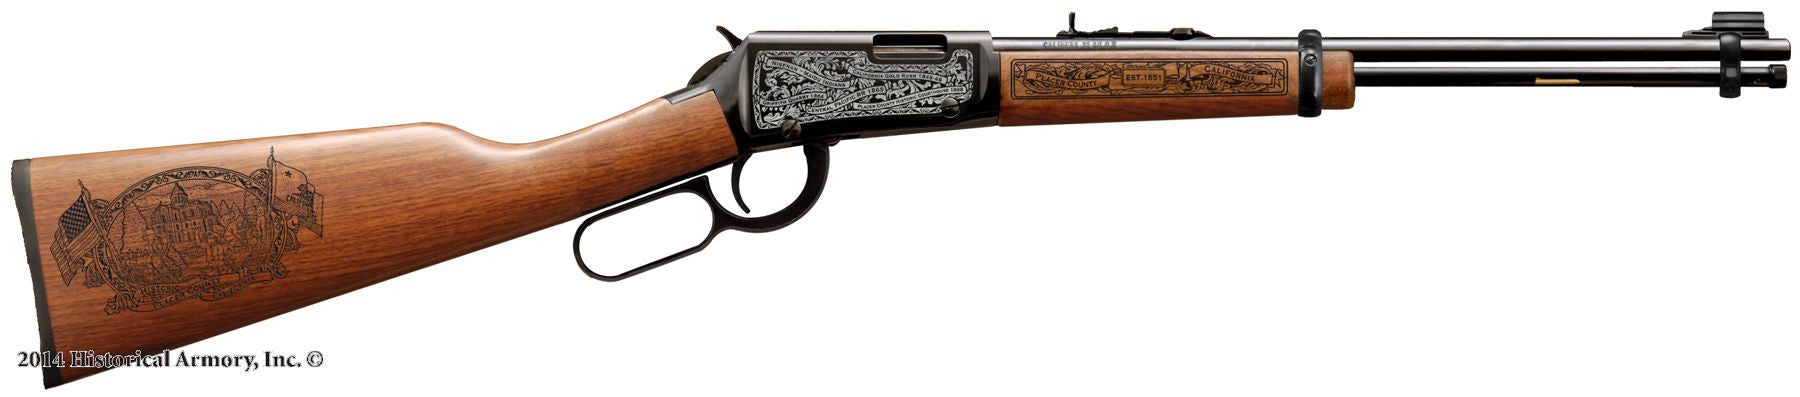 Placer county california engraved rifle H001